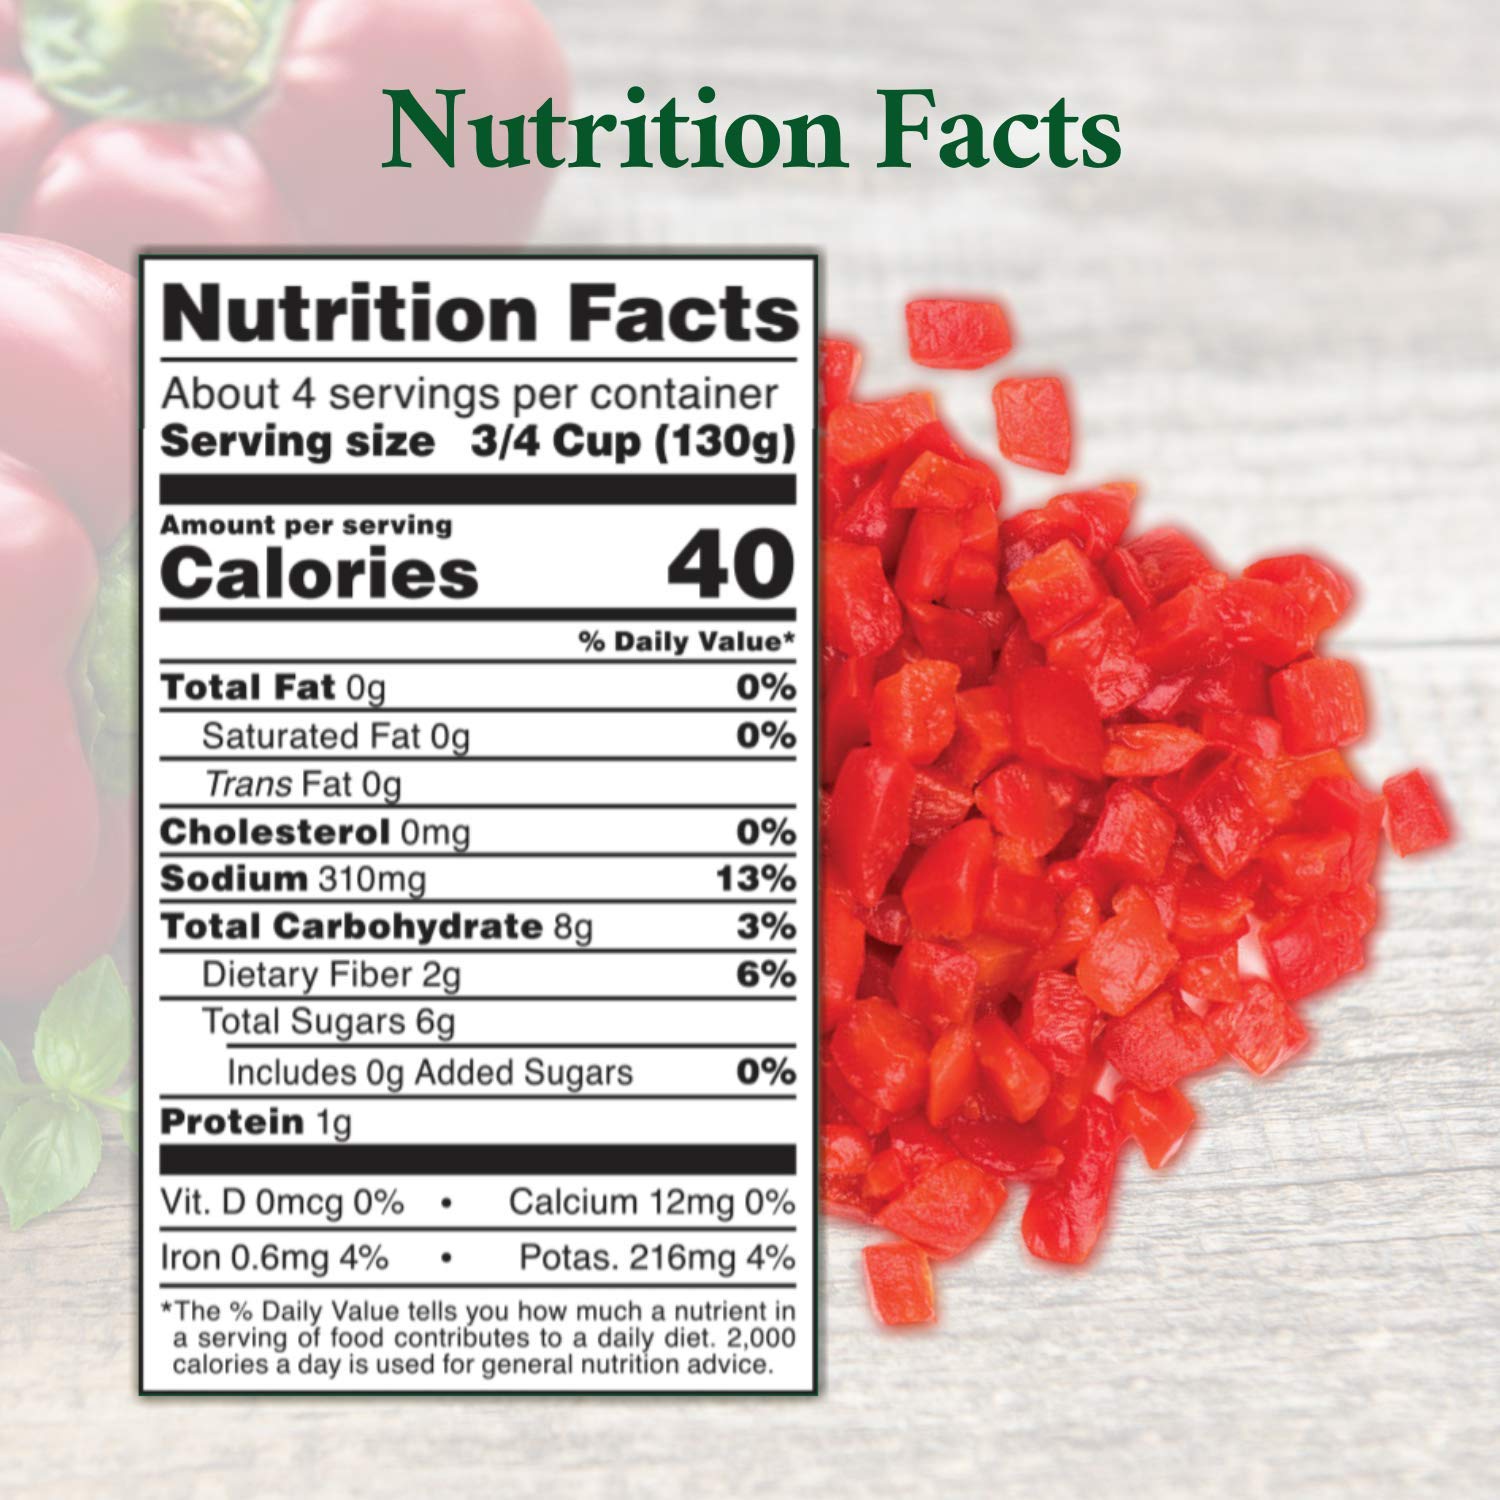 Roland Diced Red Pimiento Peppers, Specialty Imported Food, 28-Ounce Can ( 6 Count) - Packaging may vary : Fresh Sweet Peppers Produce : Grocery & Gourmet Food